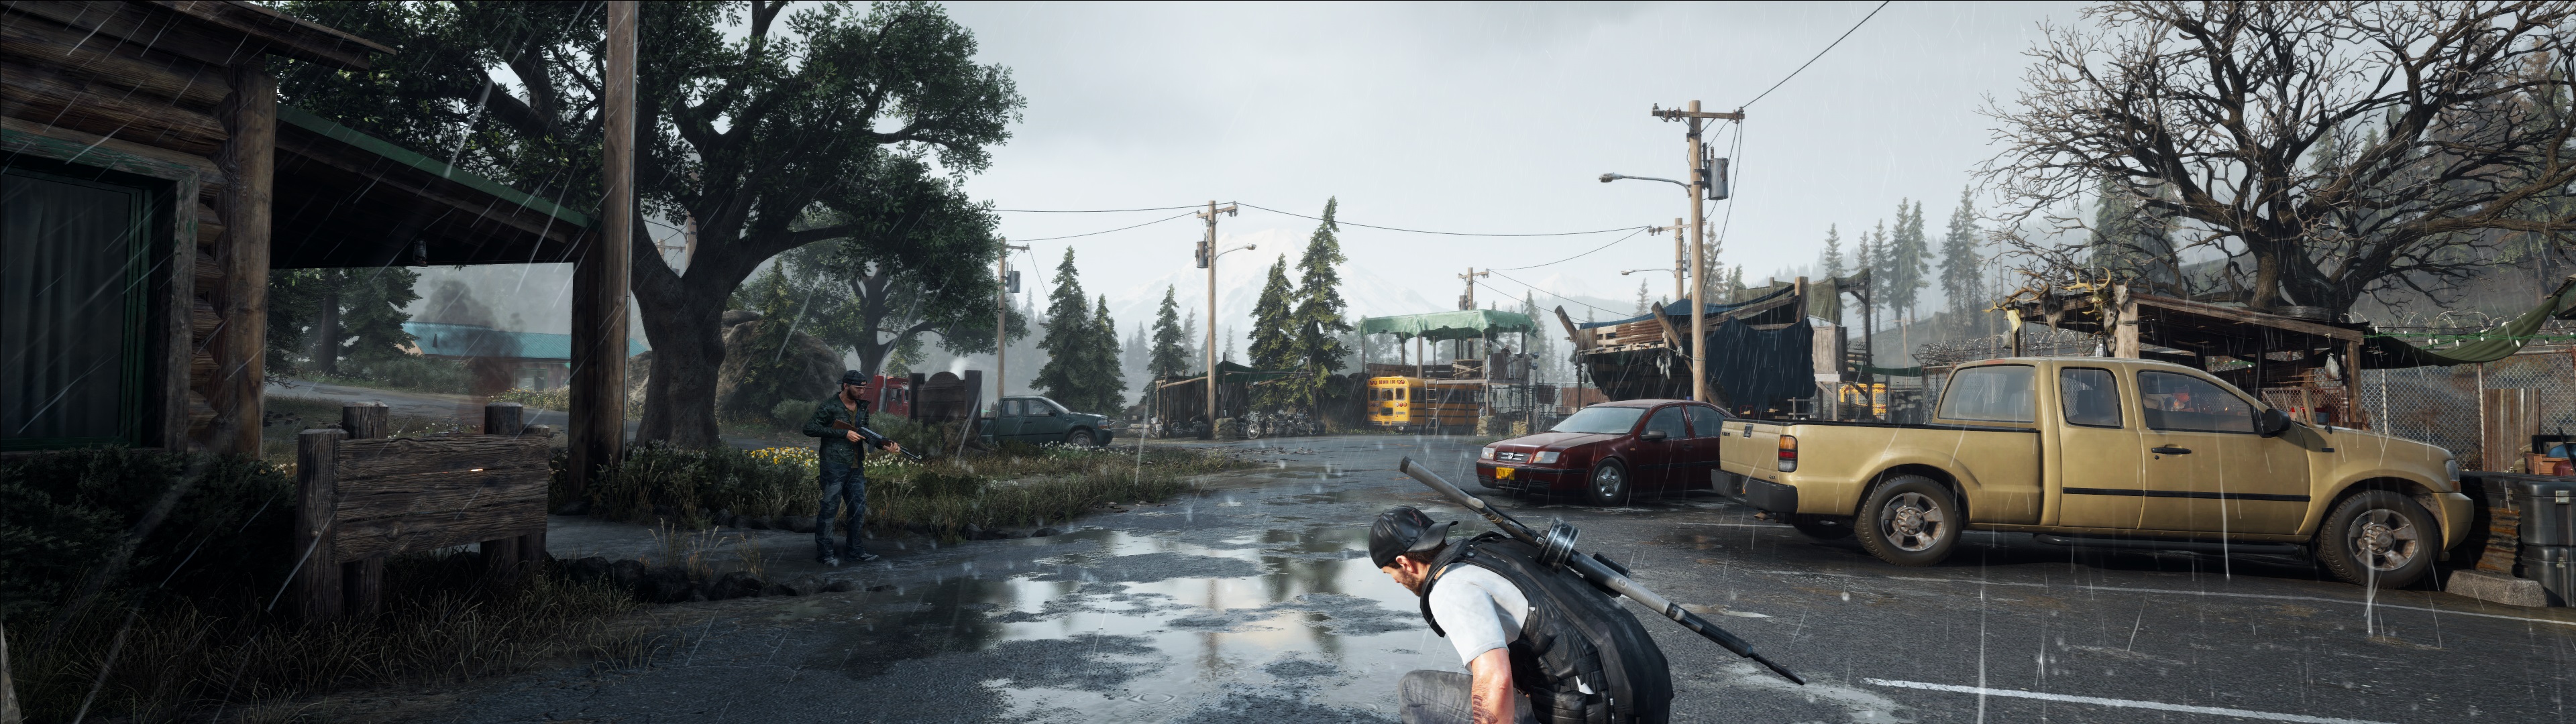 How to install a mod in Days Gone 